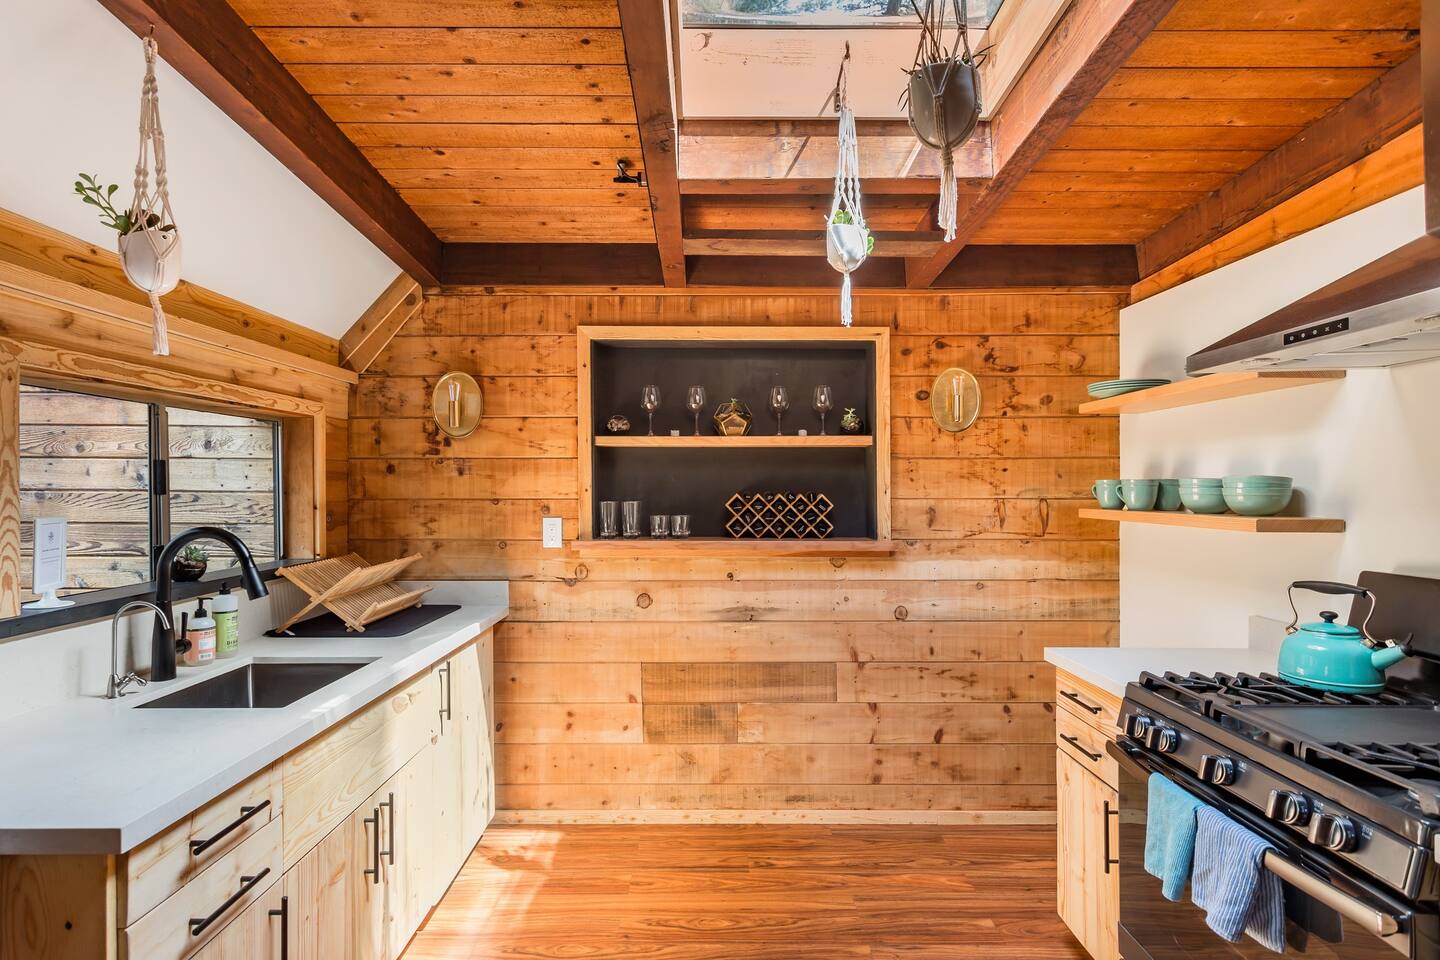 Kitchen made all of wood with interesting kitchen decoration in wall